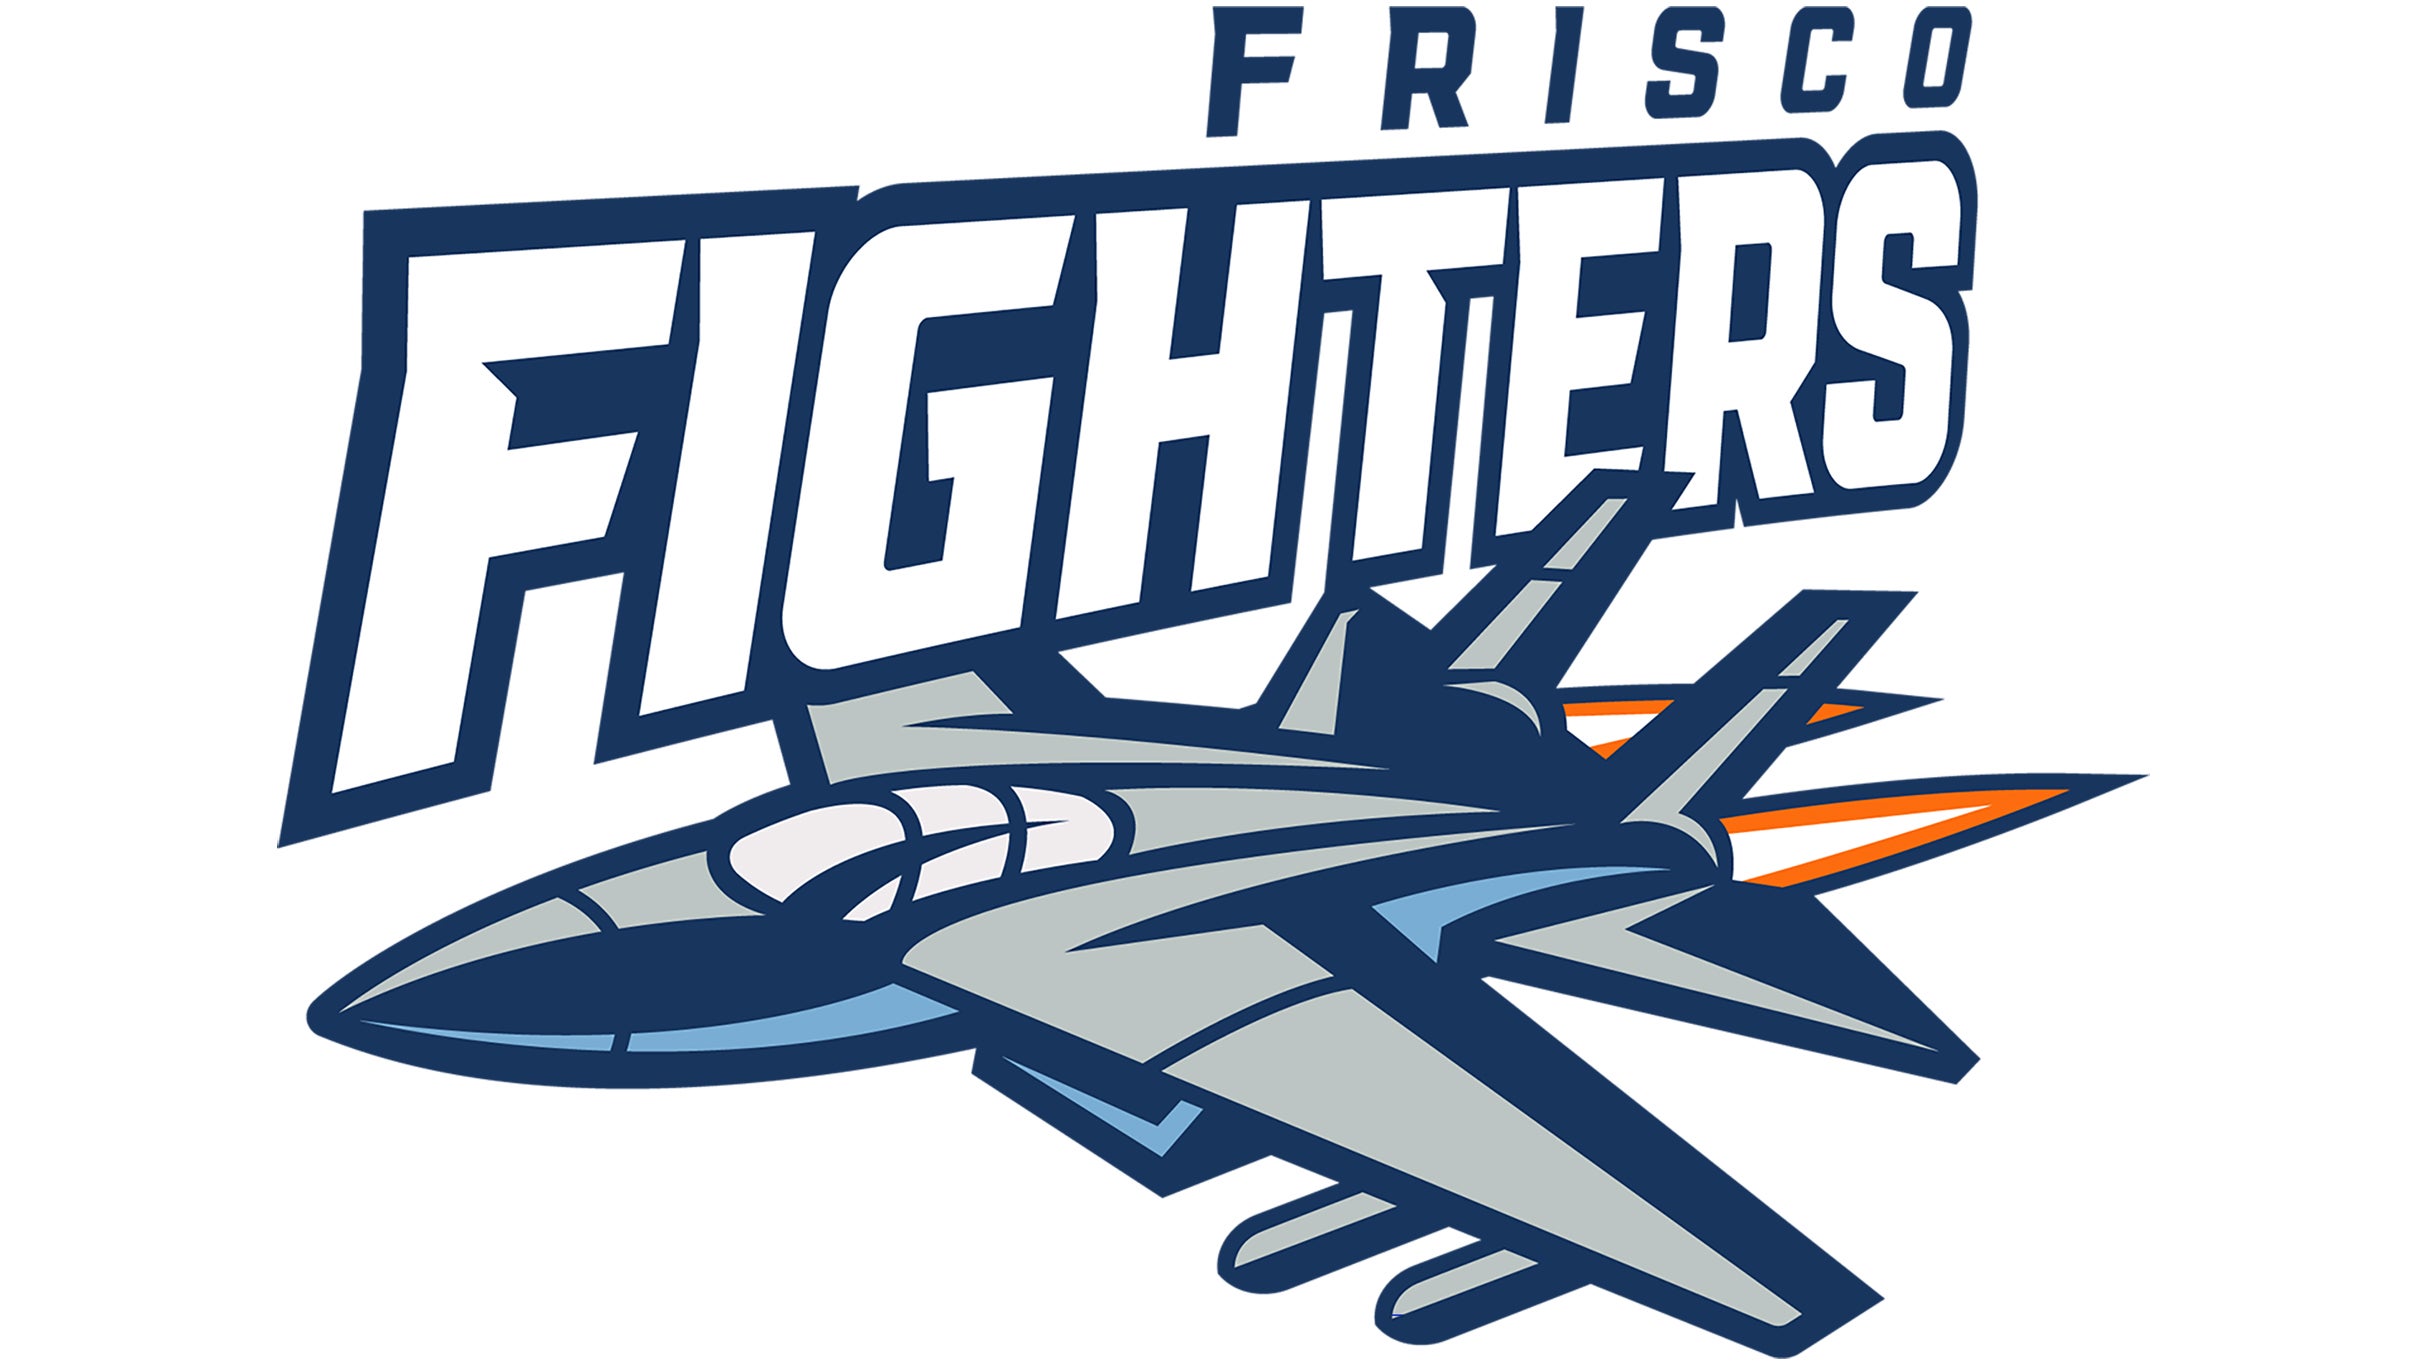 Frisco Fighters vs. Sioux Falls Storm at Hard Rock Live